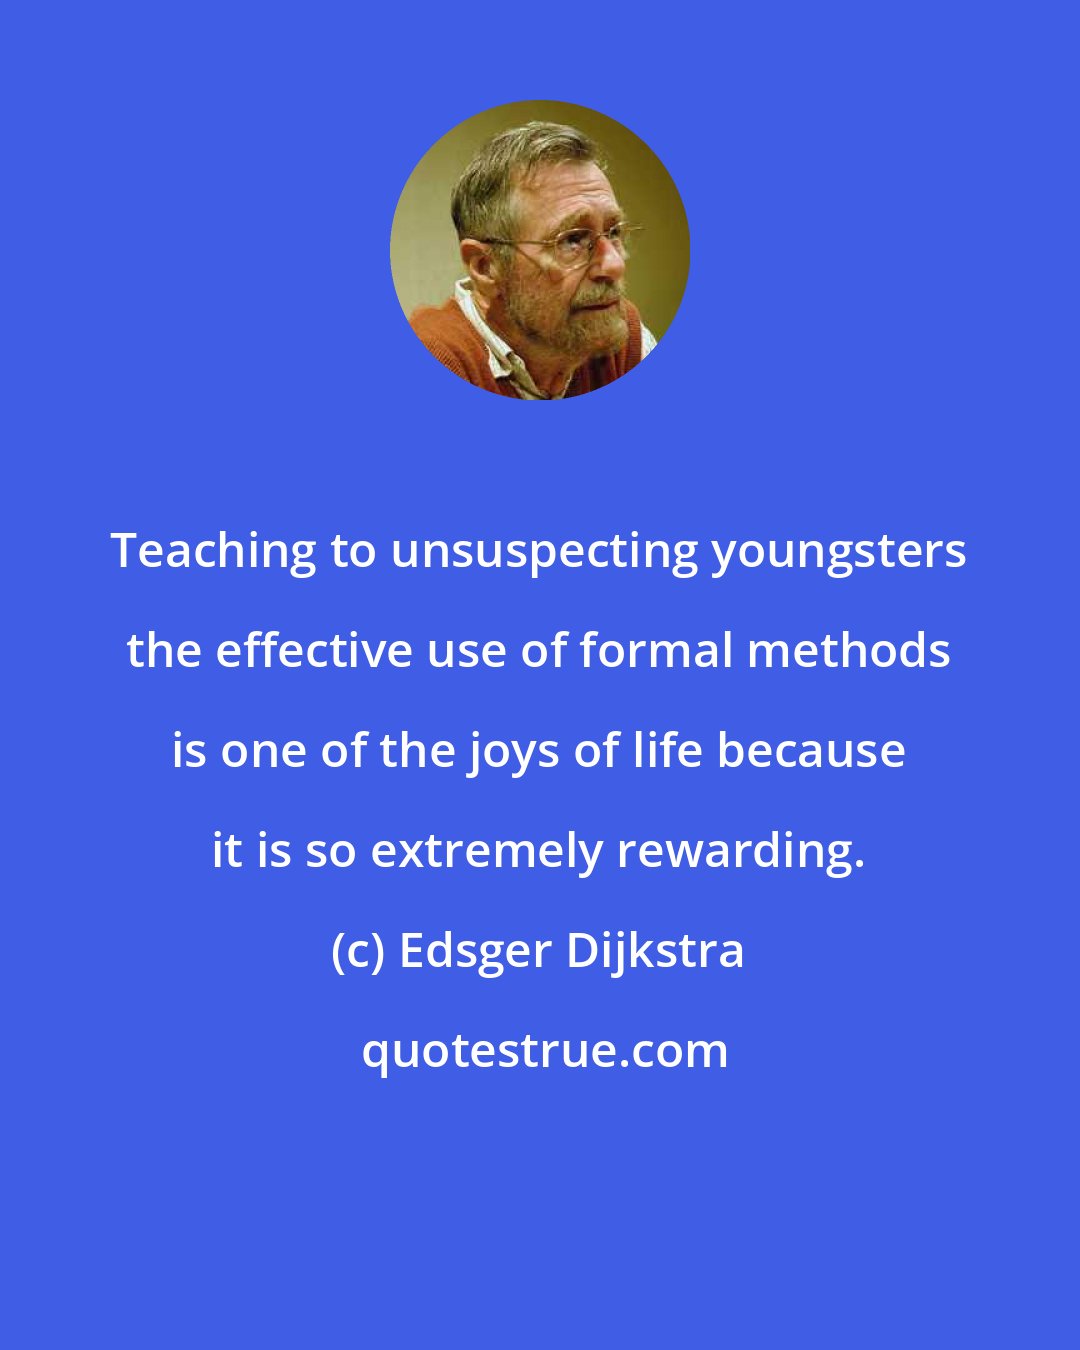 Edsger Dijkstra: Teaching to unsuspecting youngsters the effective use of formal methods is one of the joys of life because it is so extremely rewarding.